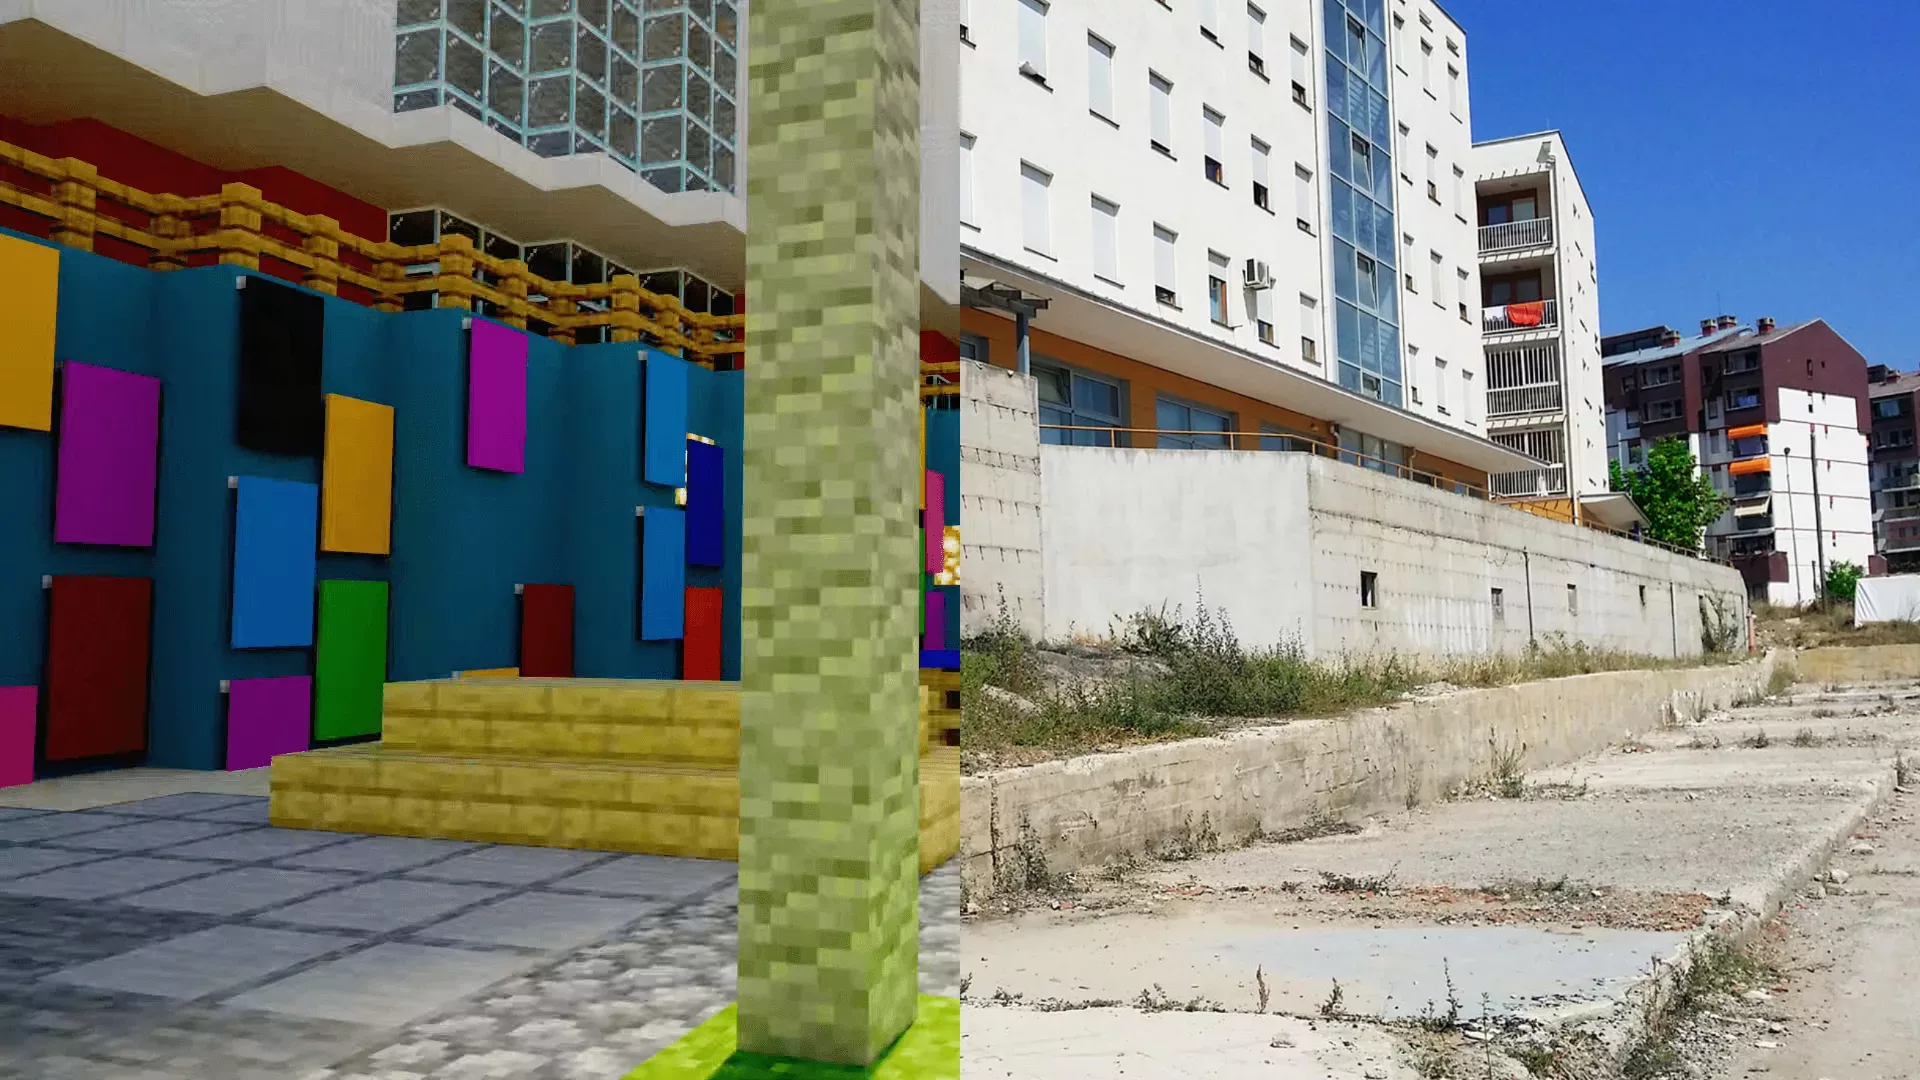 Two pictures of a minecraft building and a street.